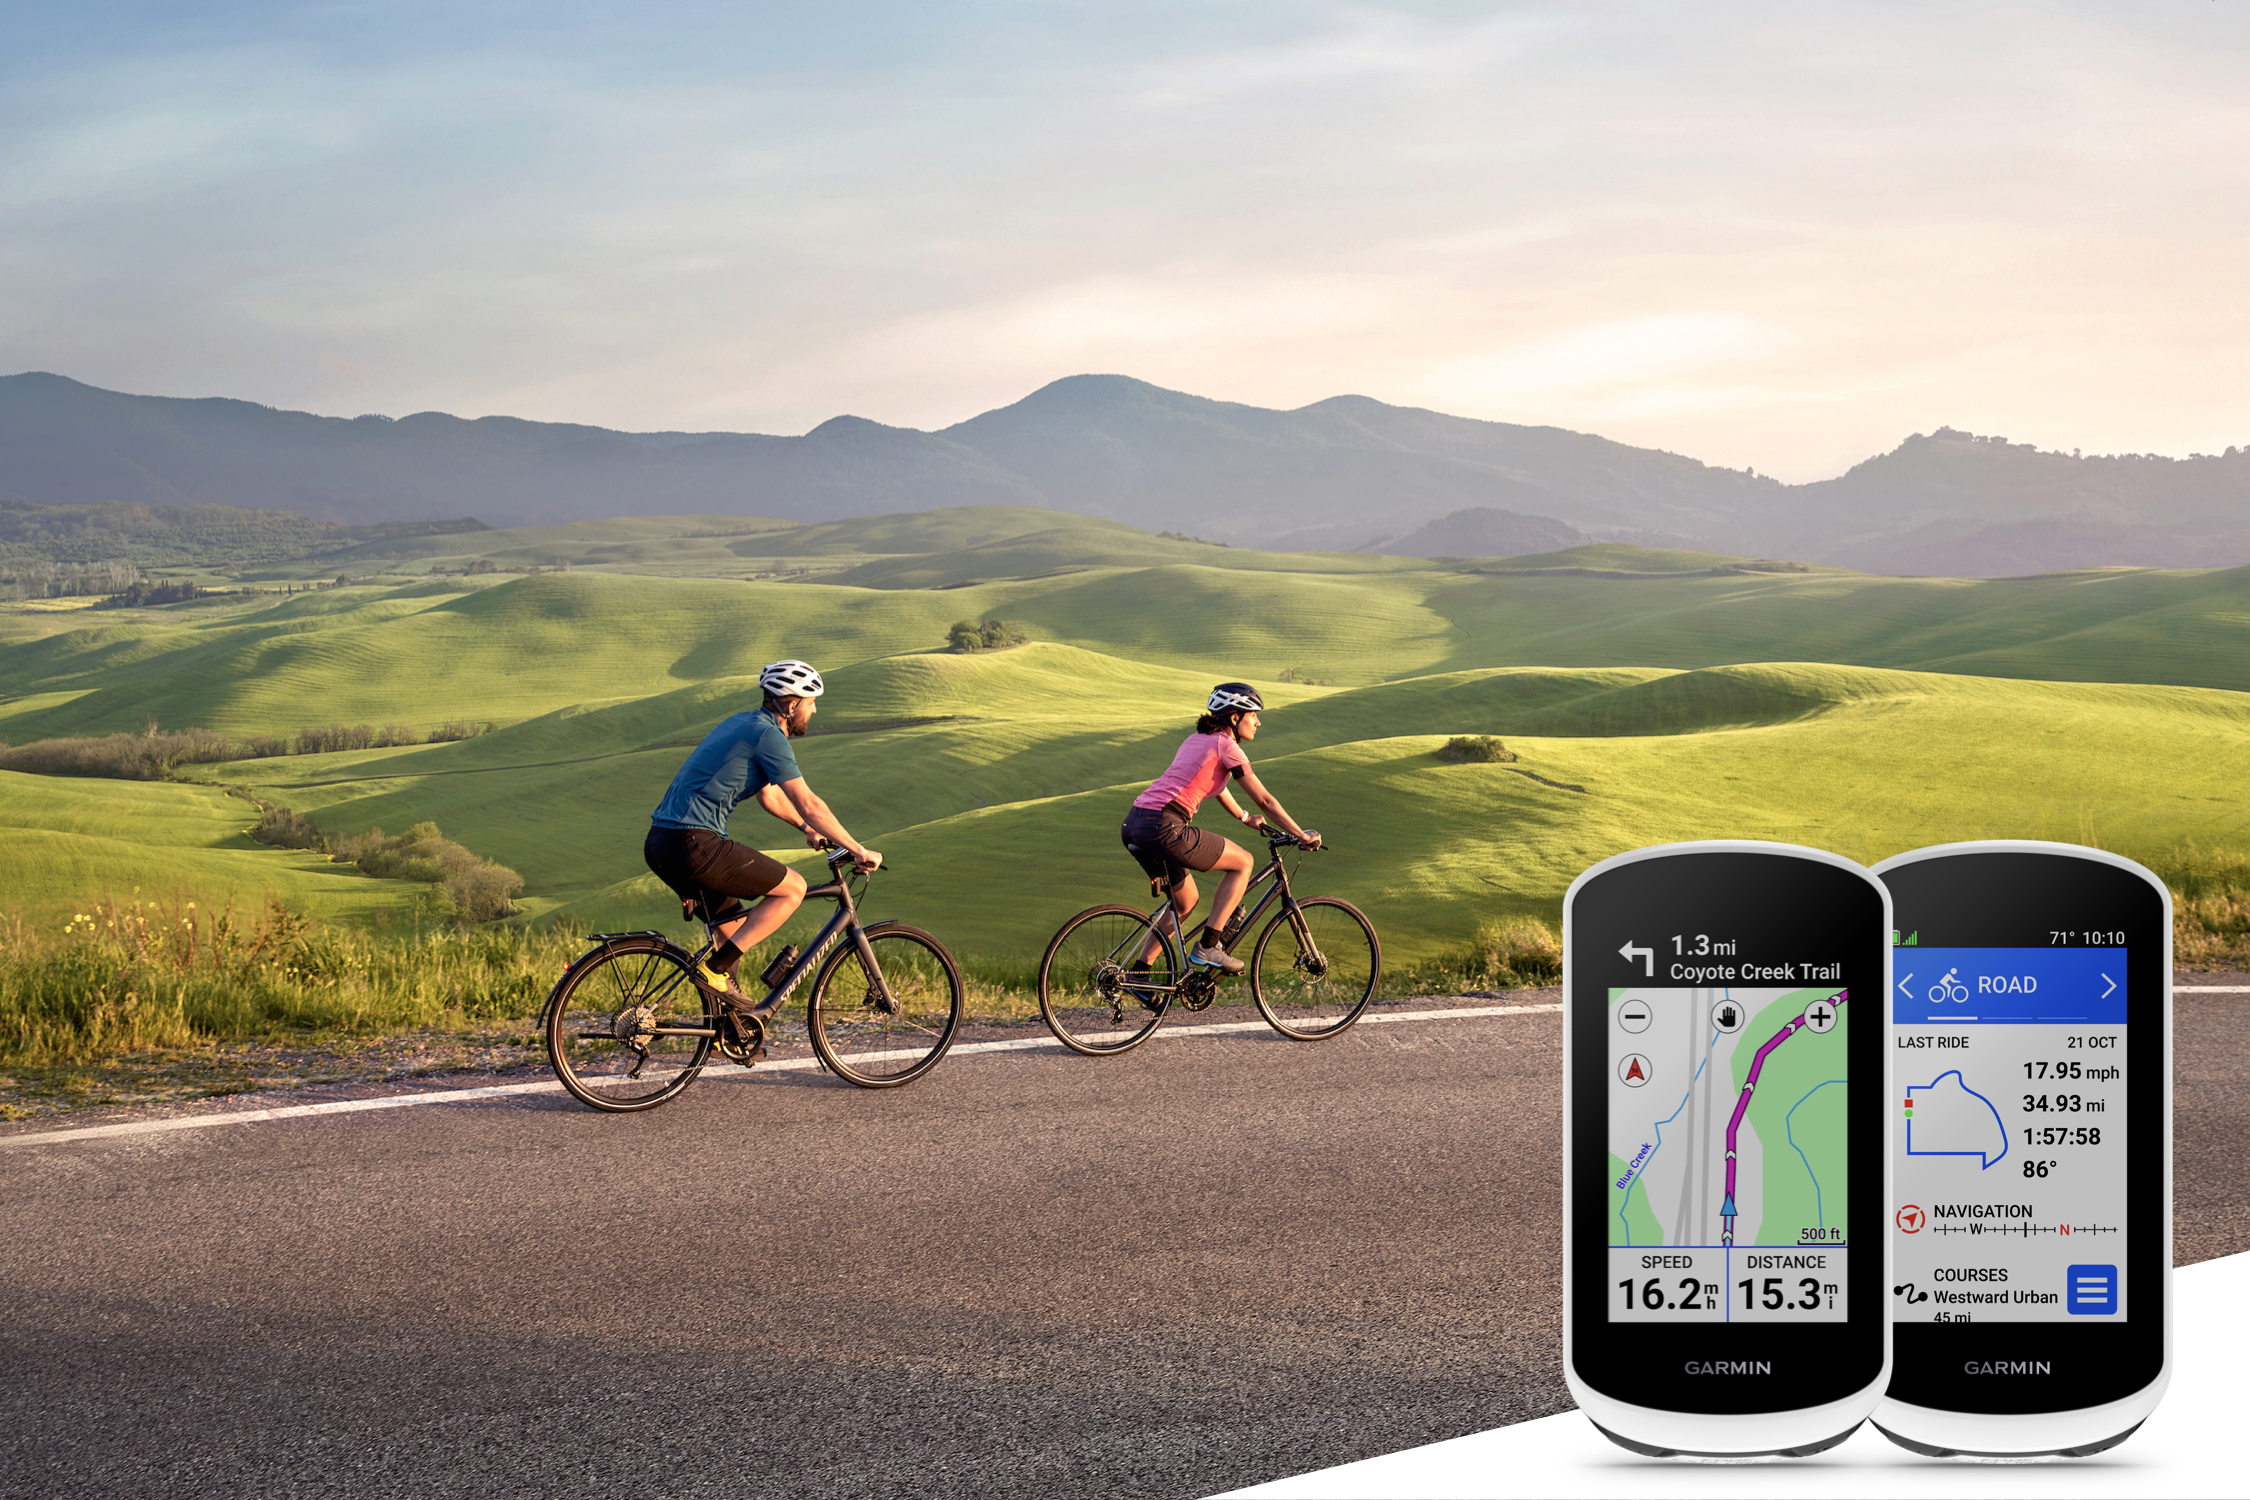 Discover new series routes Explore | with Edge the 2 Wire Business Garmin from